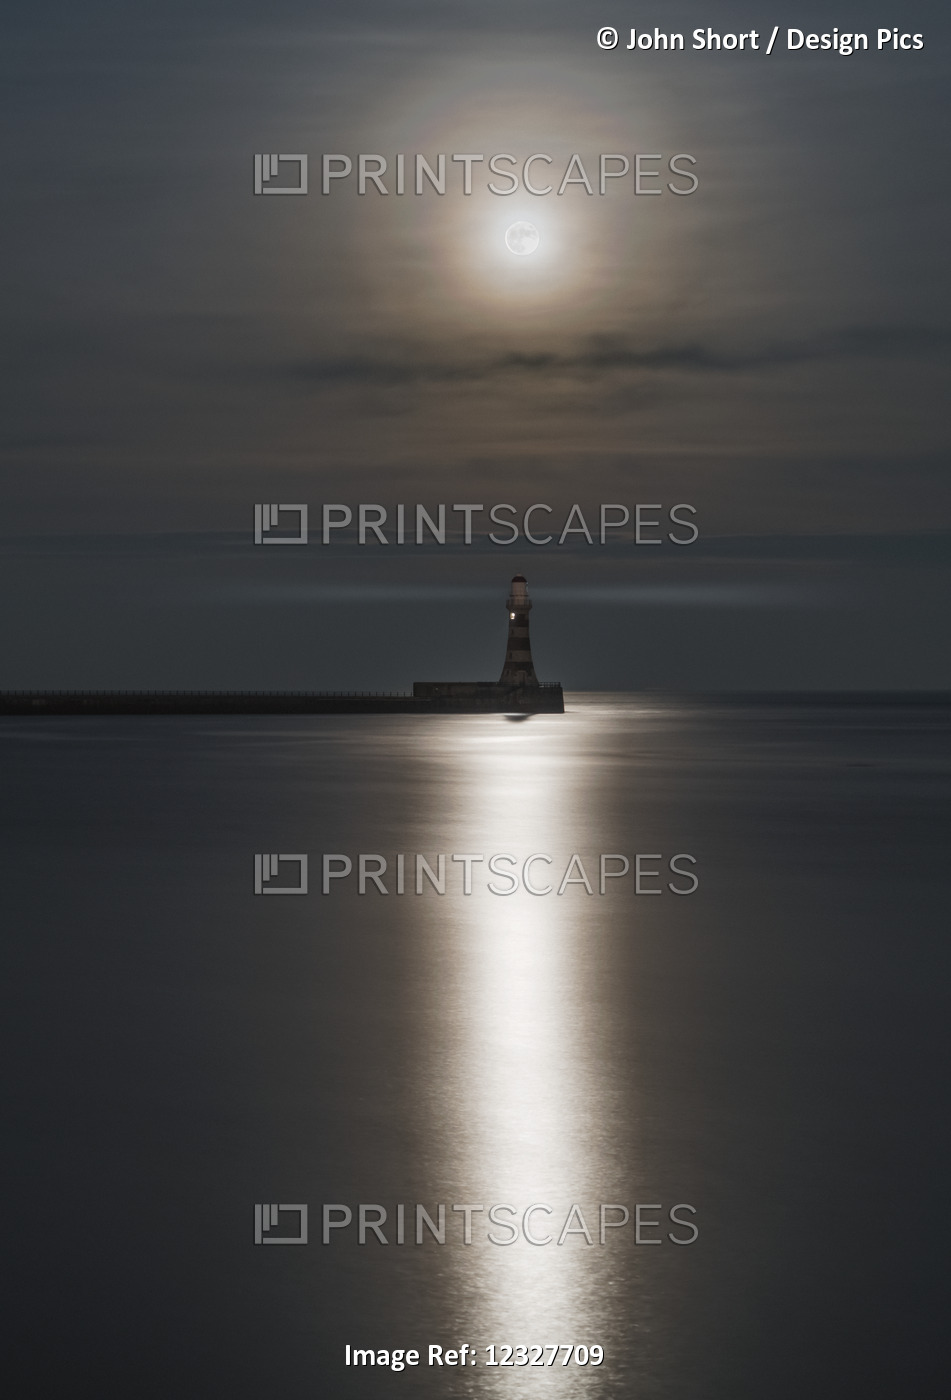 Roker Lighthouse At The End Of A Pier Under A Bright Full Moon Reflecting On ...